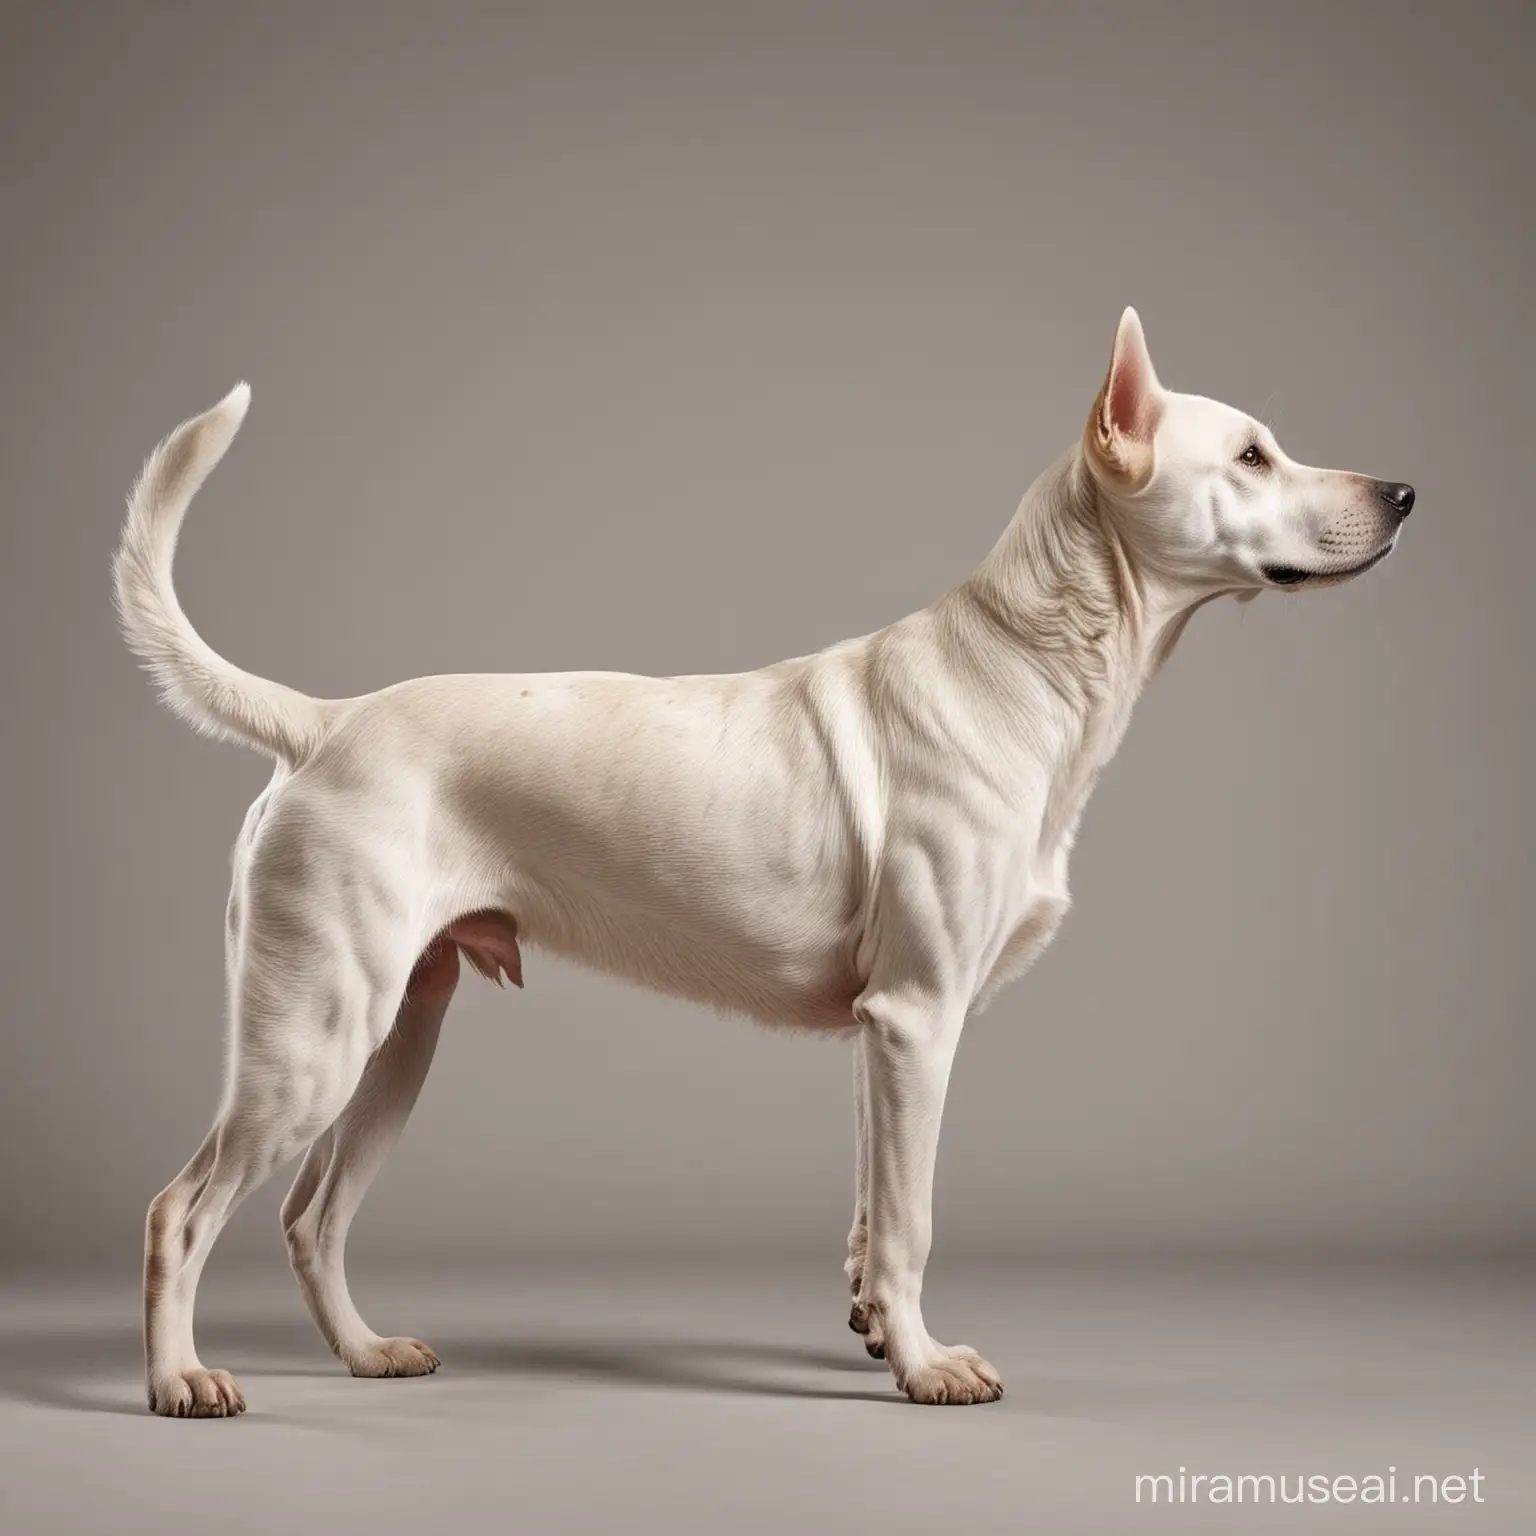 Standing Dog in Profile View with Alert Expression